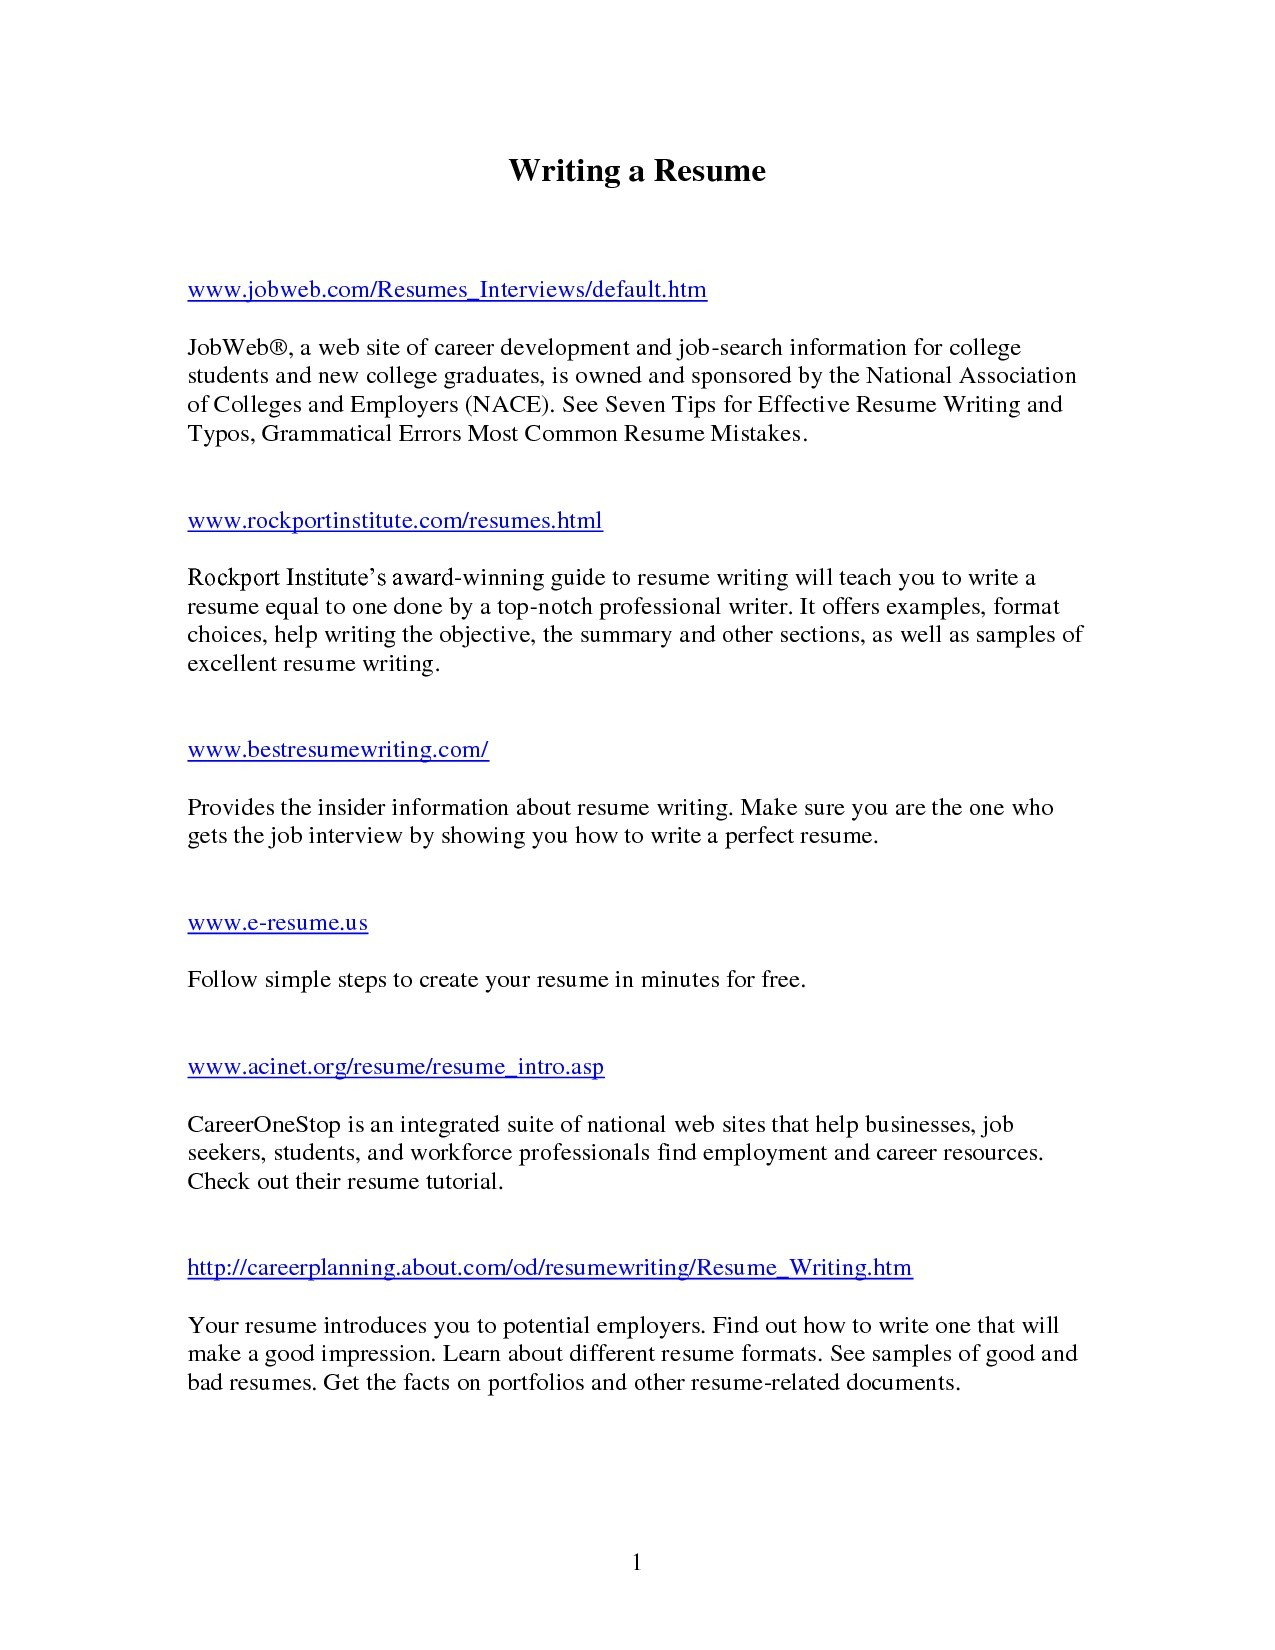 Business Letter format Template - Business Writing Templates Fresh Inspirational Business Letter